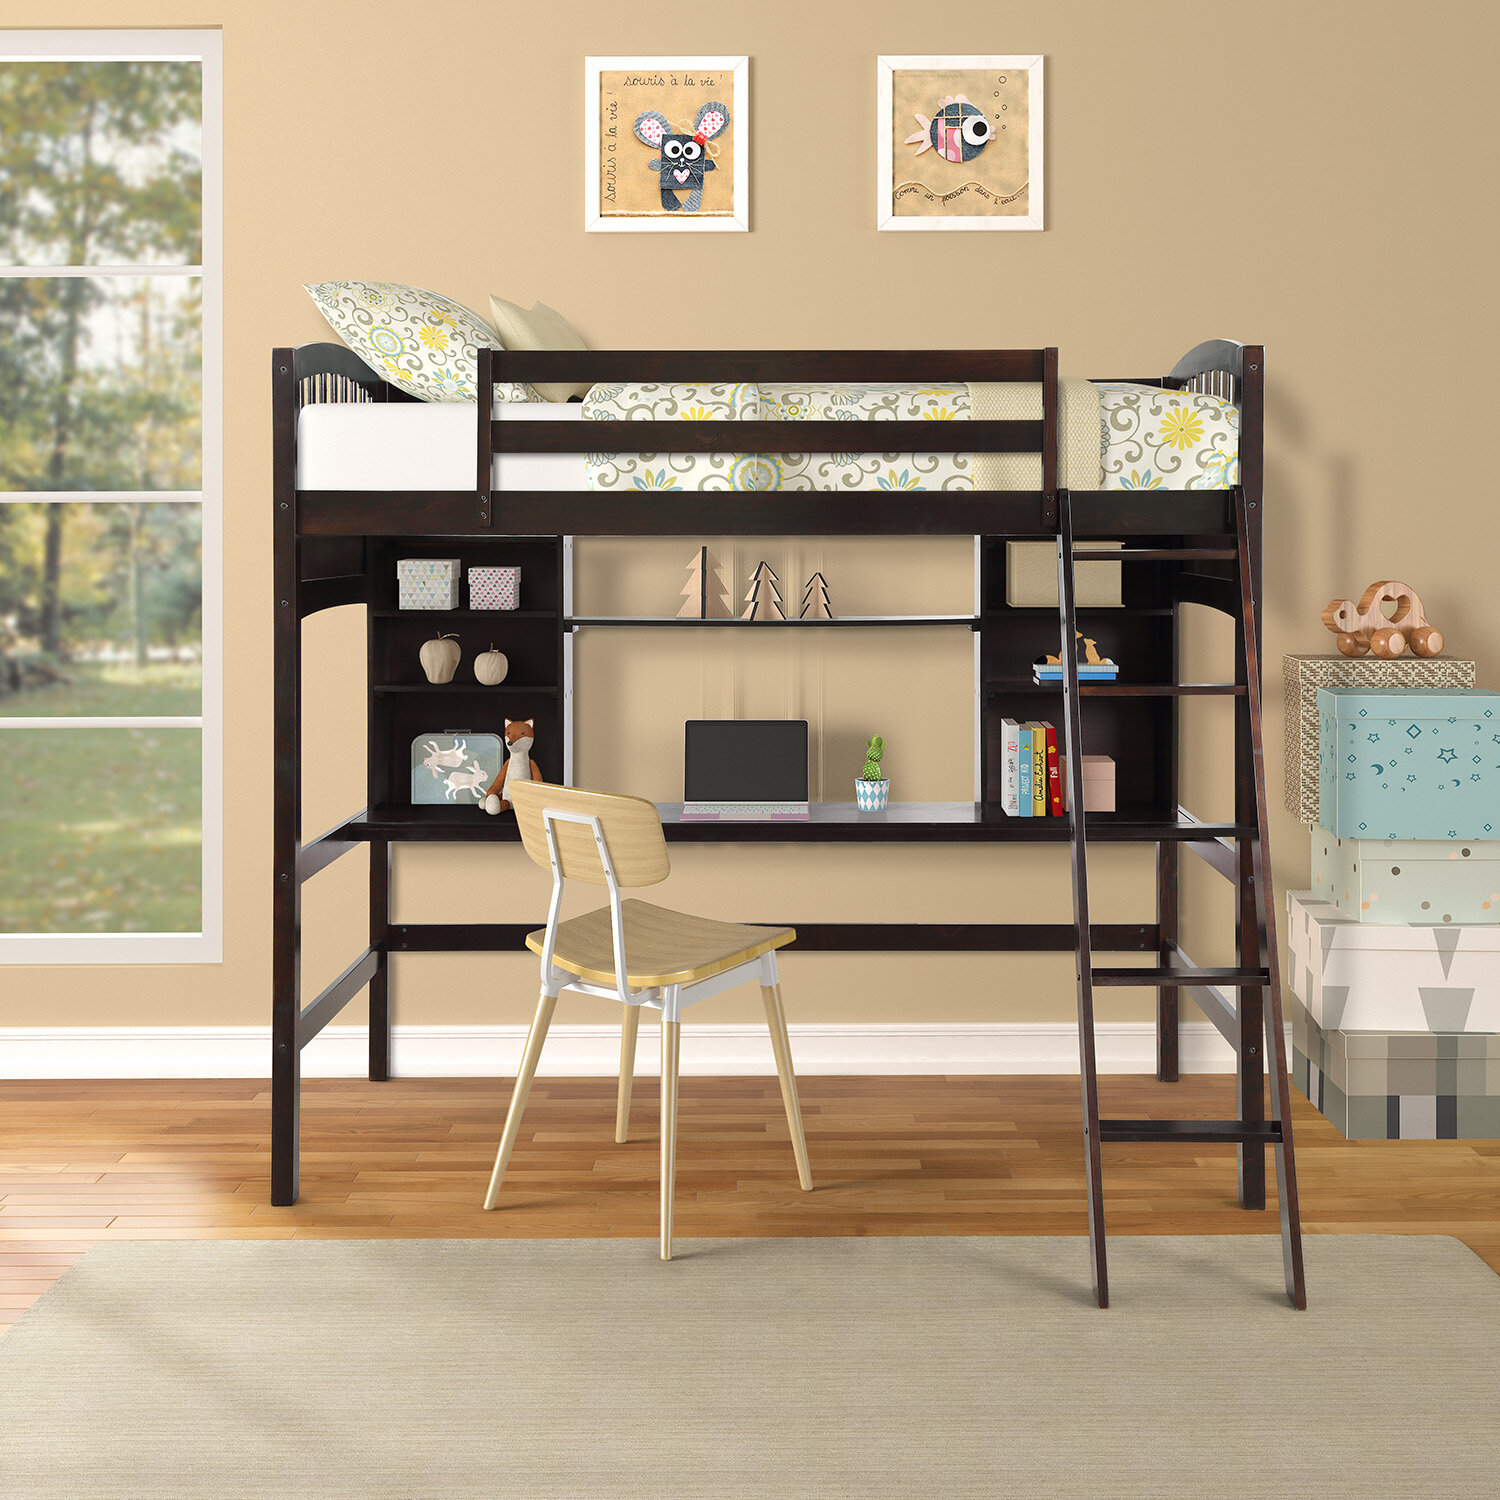 Harriet Bee Canna Twin Loft Bed with Desk Drawers and Ladder | Wayfair